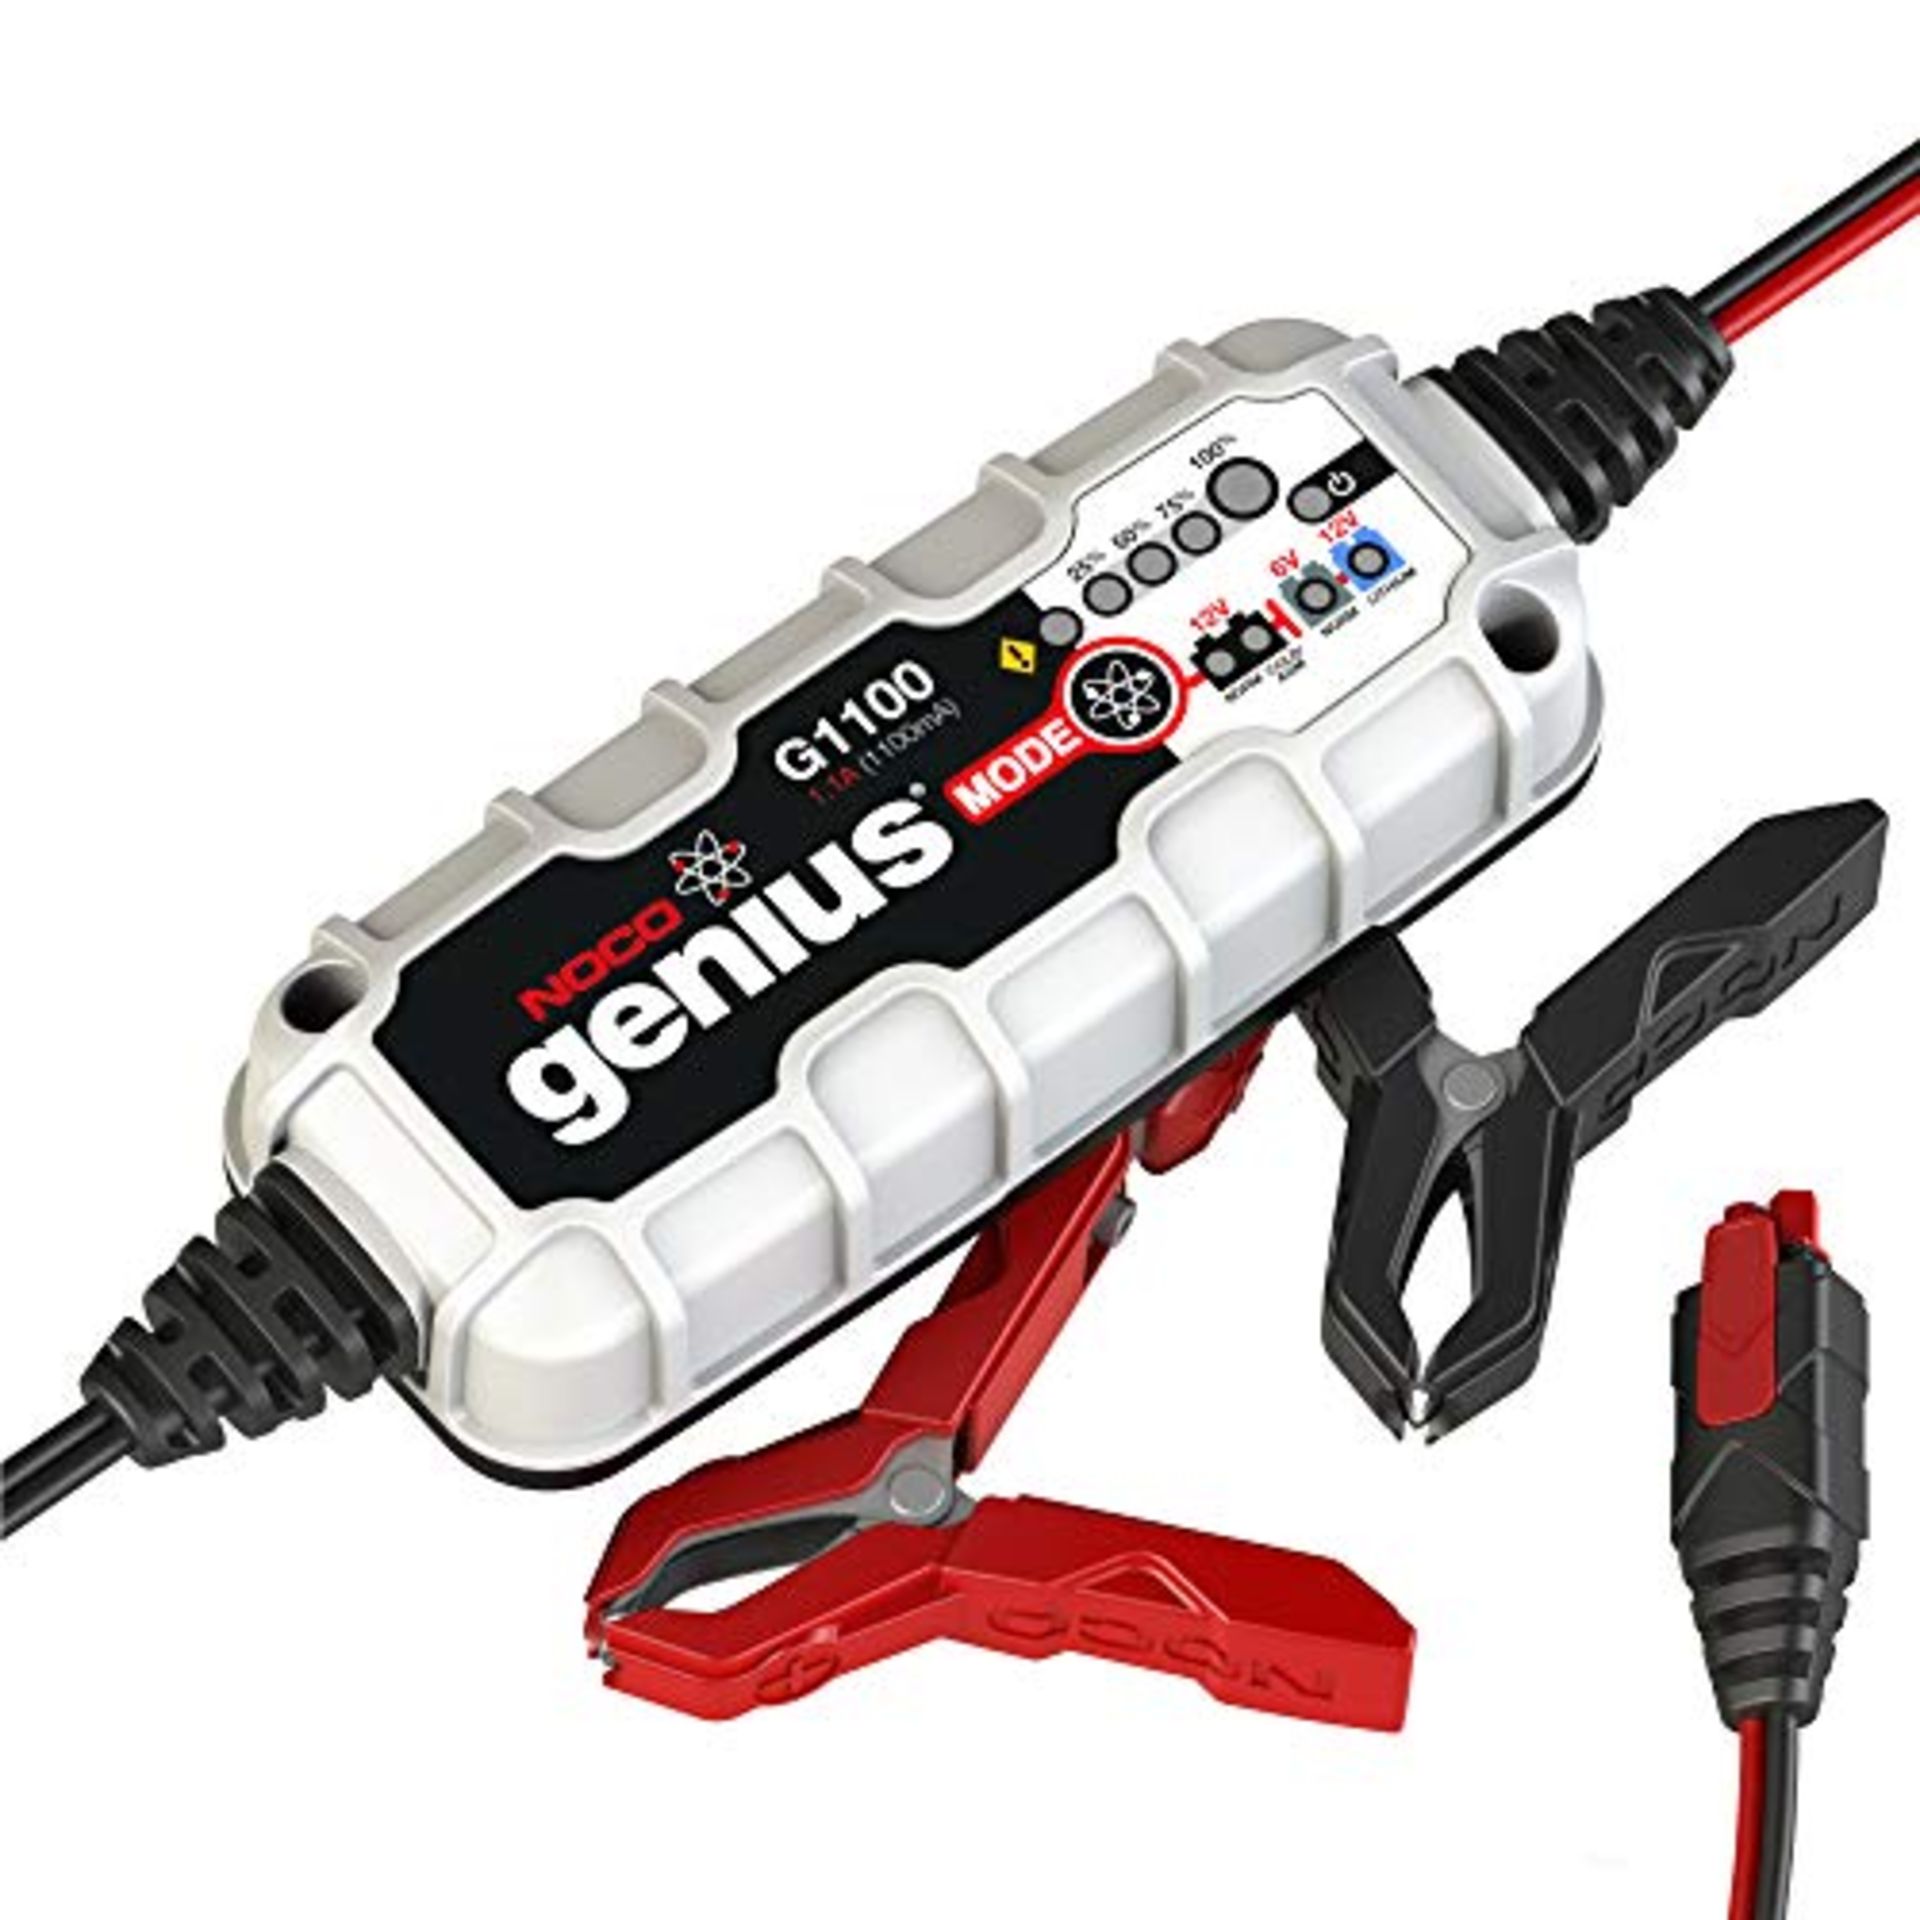 NOCO Genius G1100UK 6V and 12V 1.1 Amp Smart Battery Charger and Maintainer